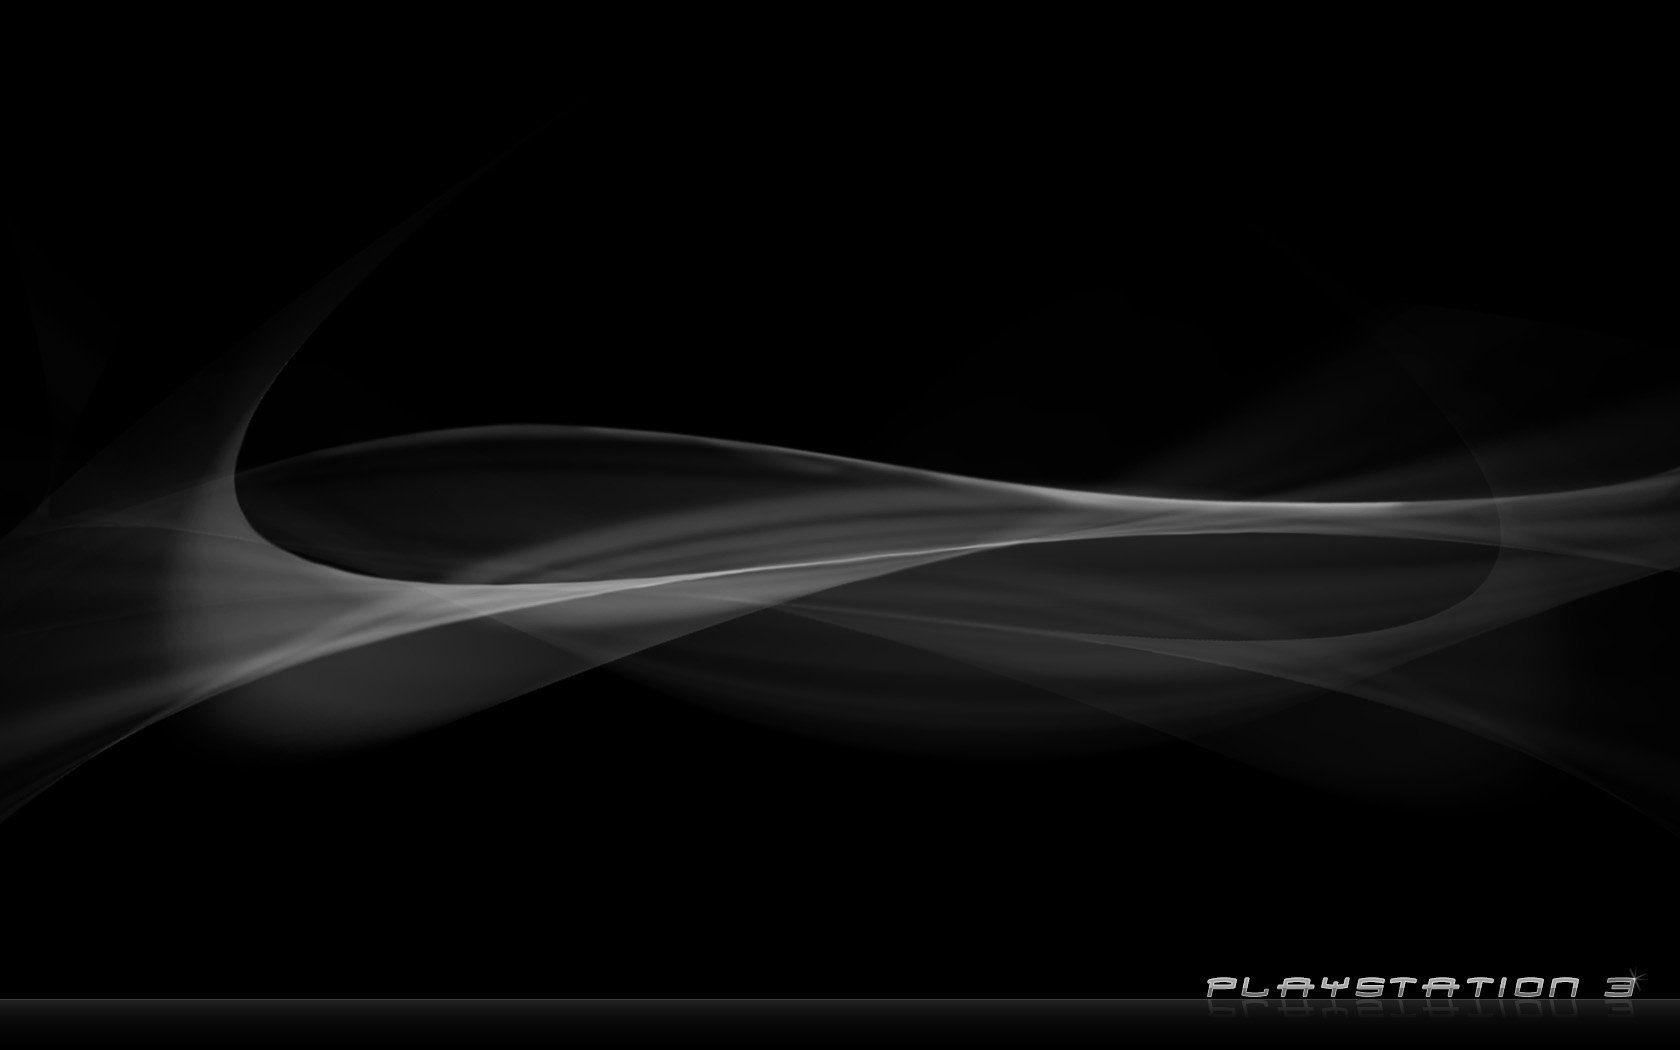 Playstation 3 Wallpaper By Helix FX